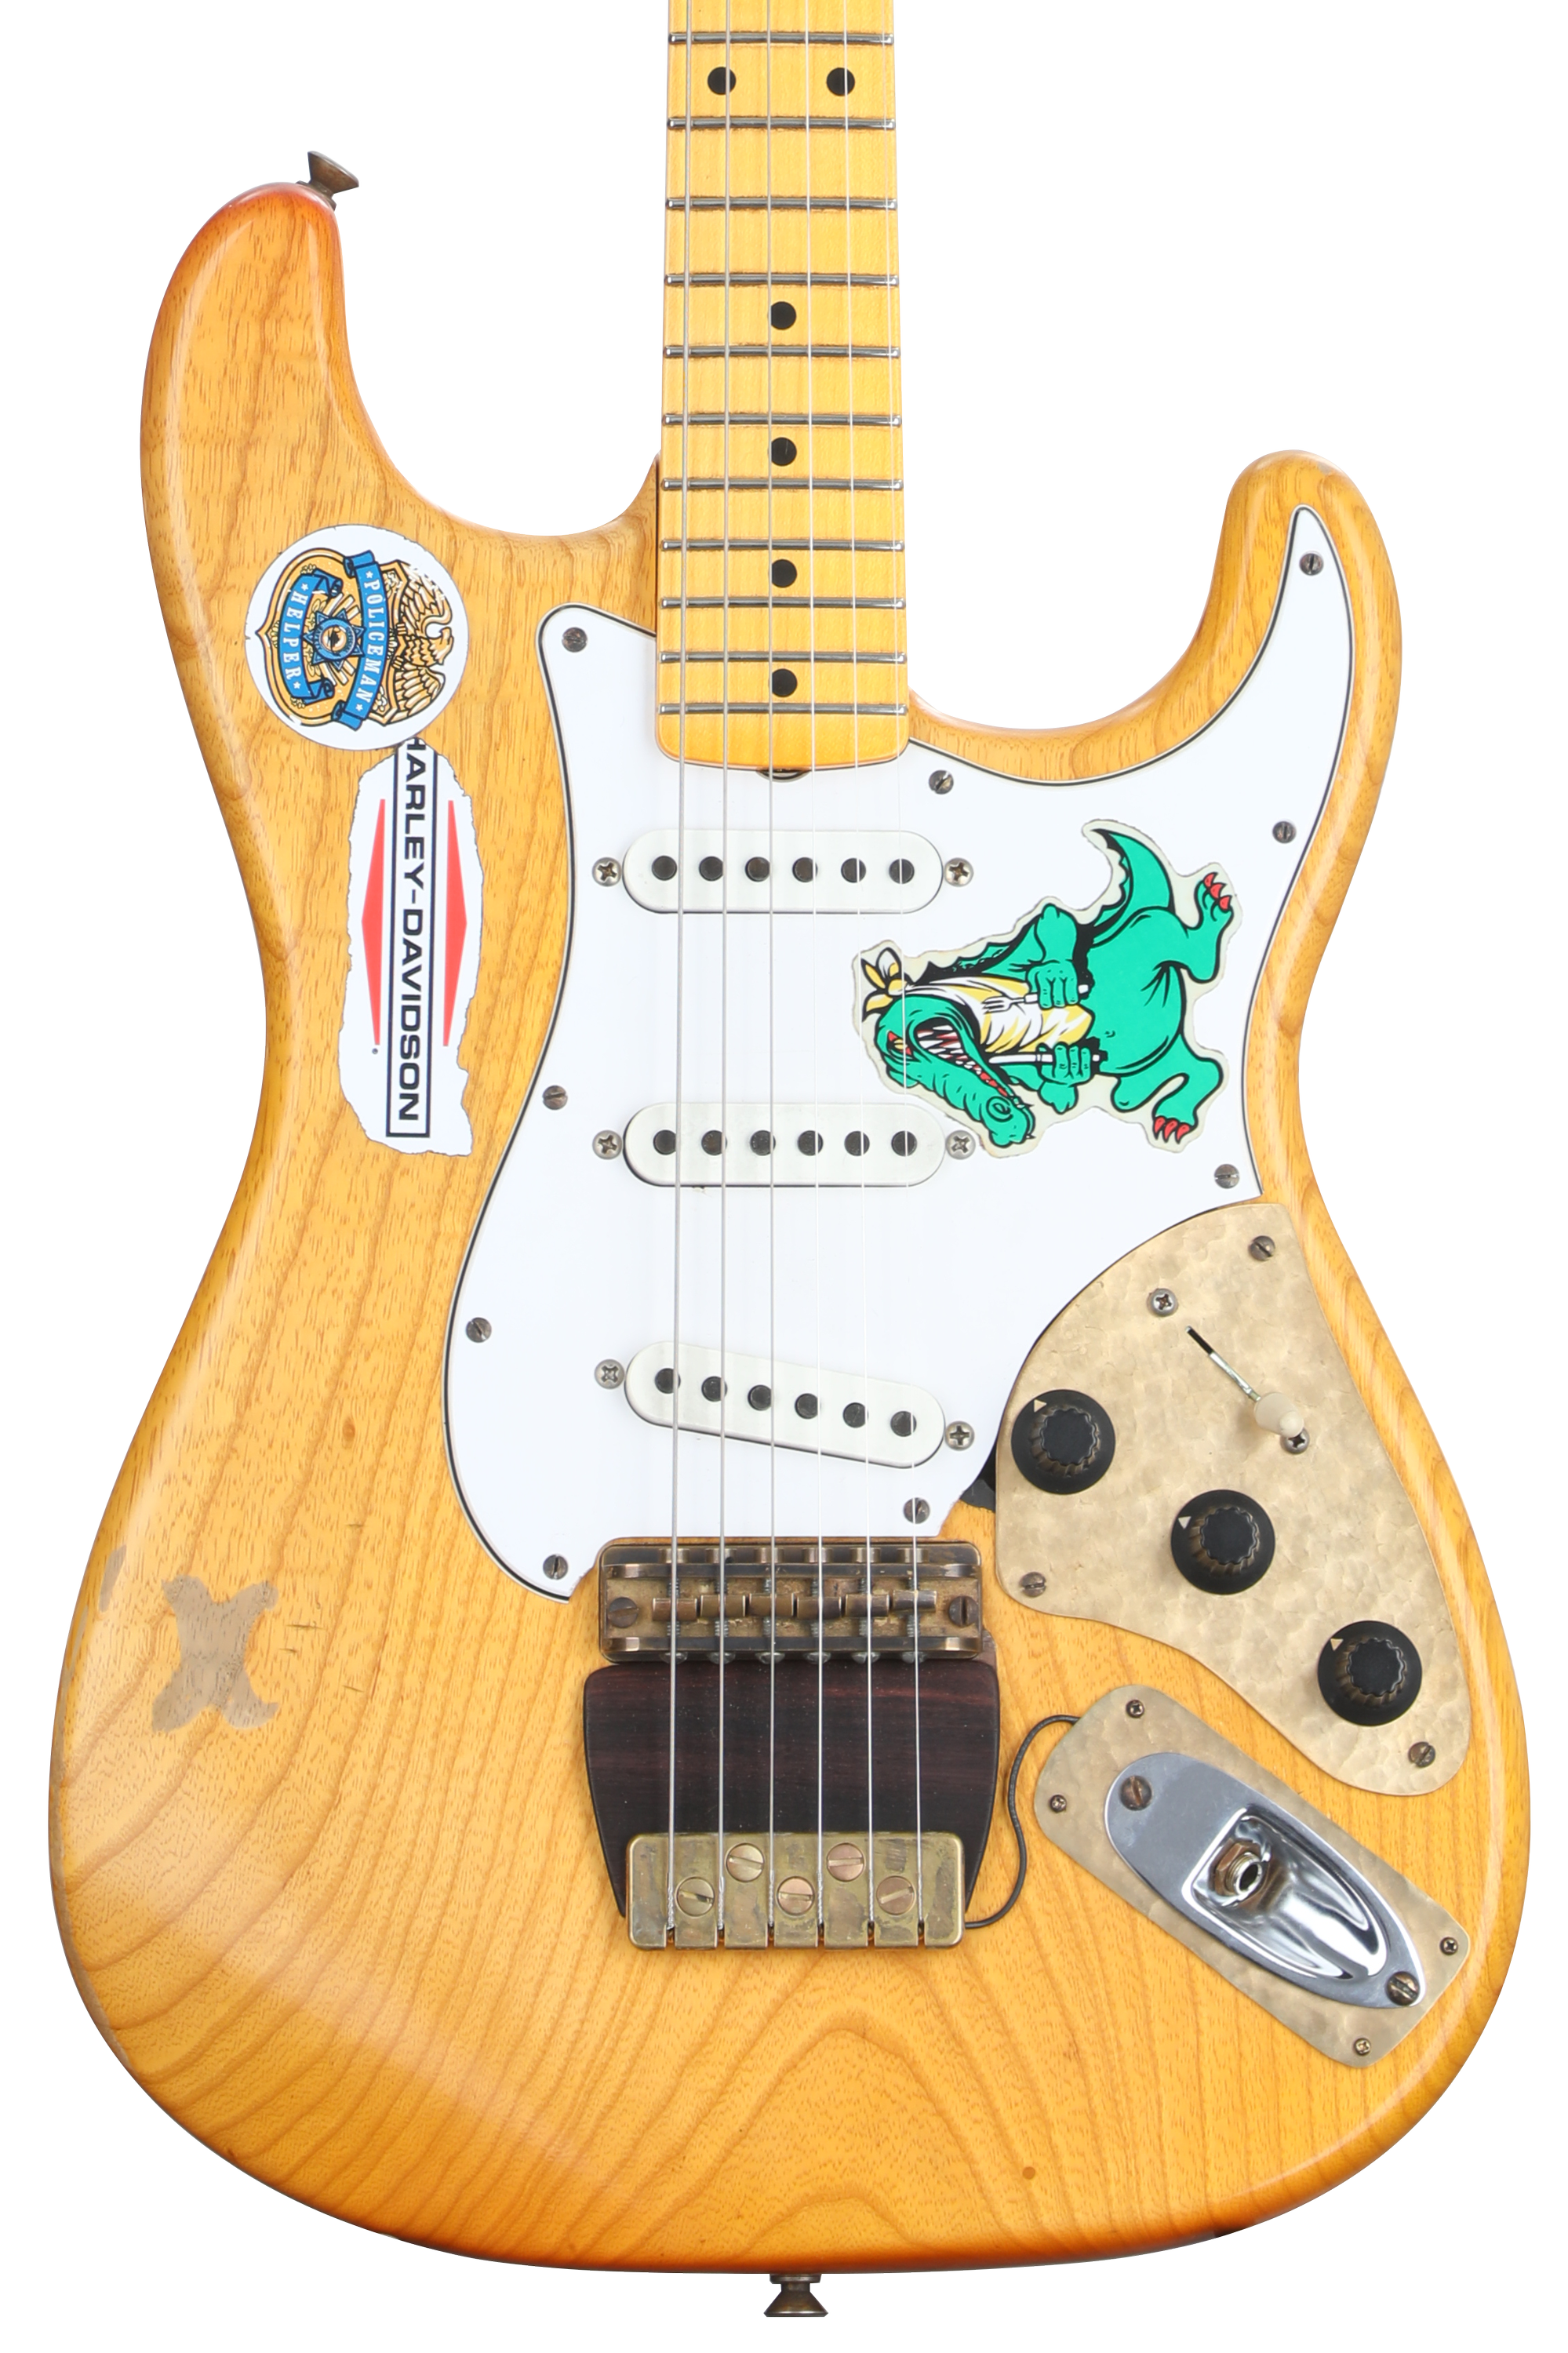 Guitar Fender Sweetwater Limited Electric Natural Alligator Edition Shop - Jerry | Strat Custom Garcia